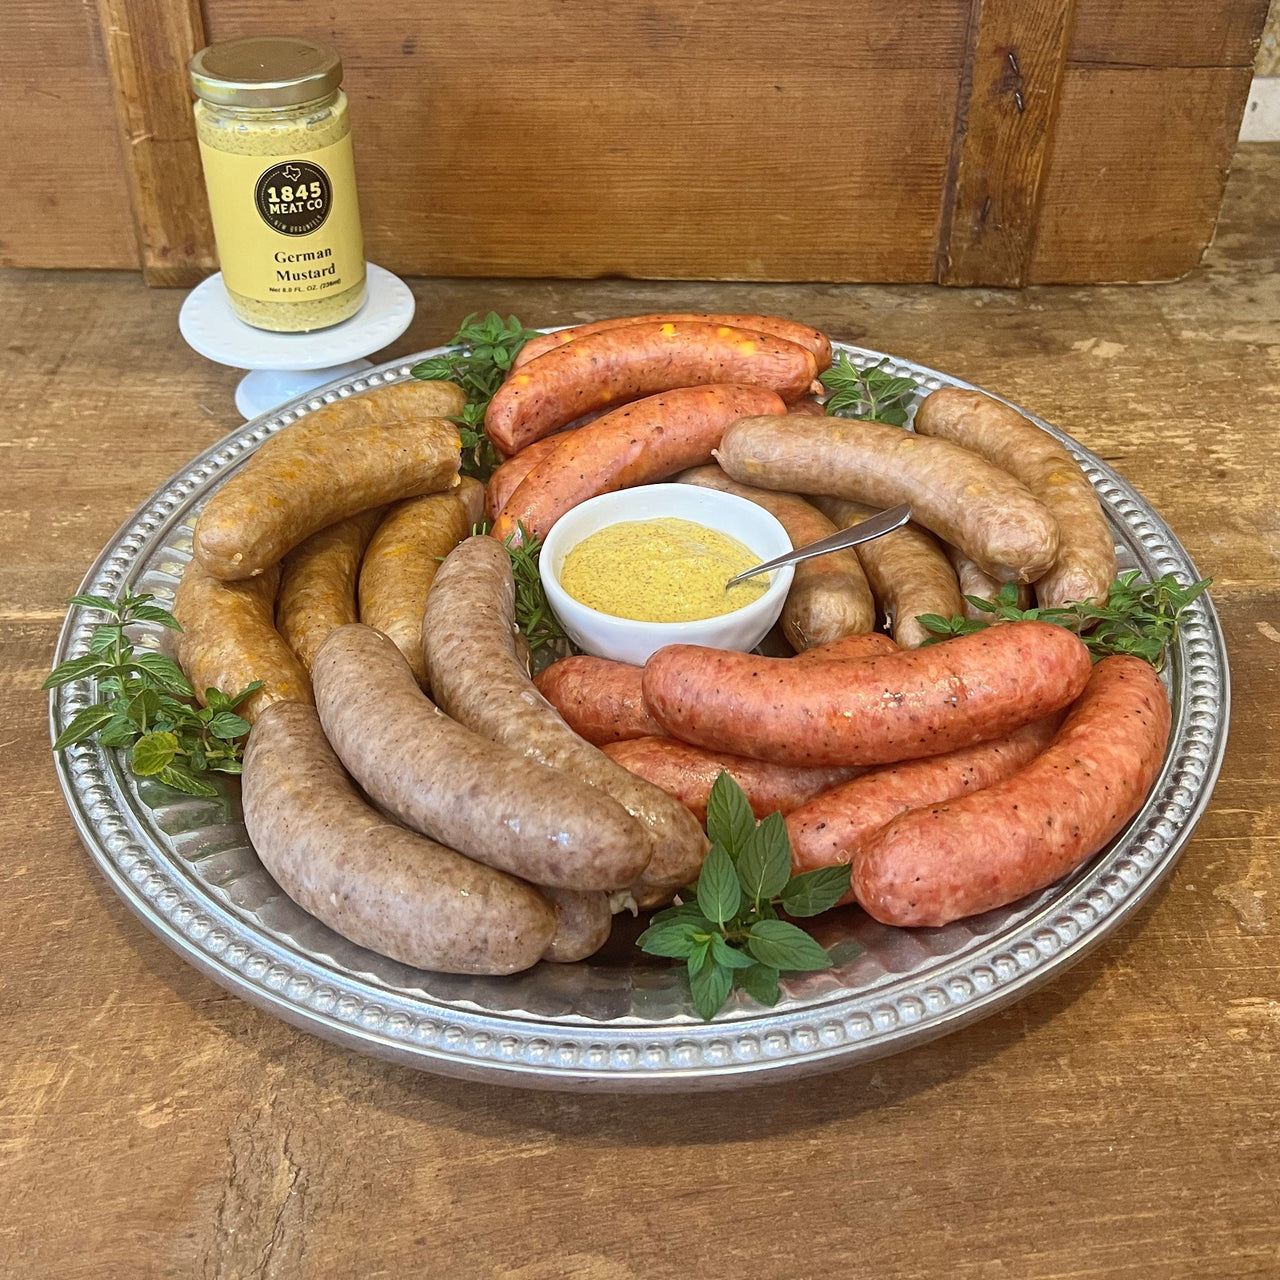 This great collection of some of our best sausage is a family favorite.  Includes:  16 oz. Pork & Beef Sausage 16 oz. Bratwurst 16 oz. Cheddar Sausage 16 oz. Peach Jalapeno Sausage 16 oz. Spiced Apple Sausage 8 oz. Jar of German Mustard ﻿Item #50E